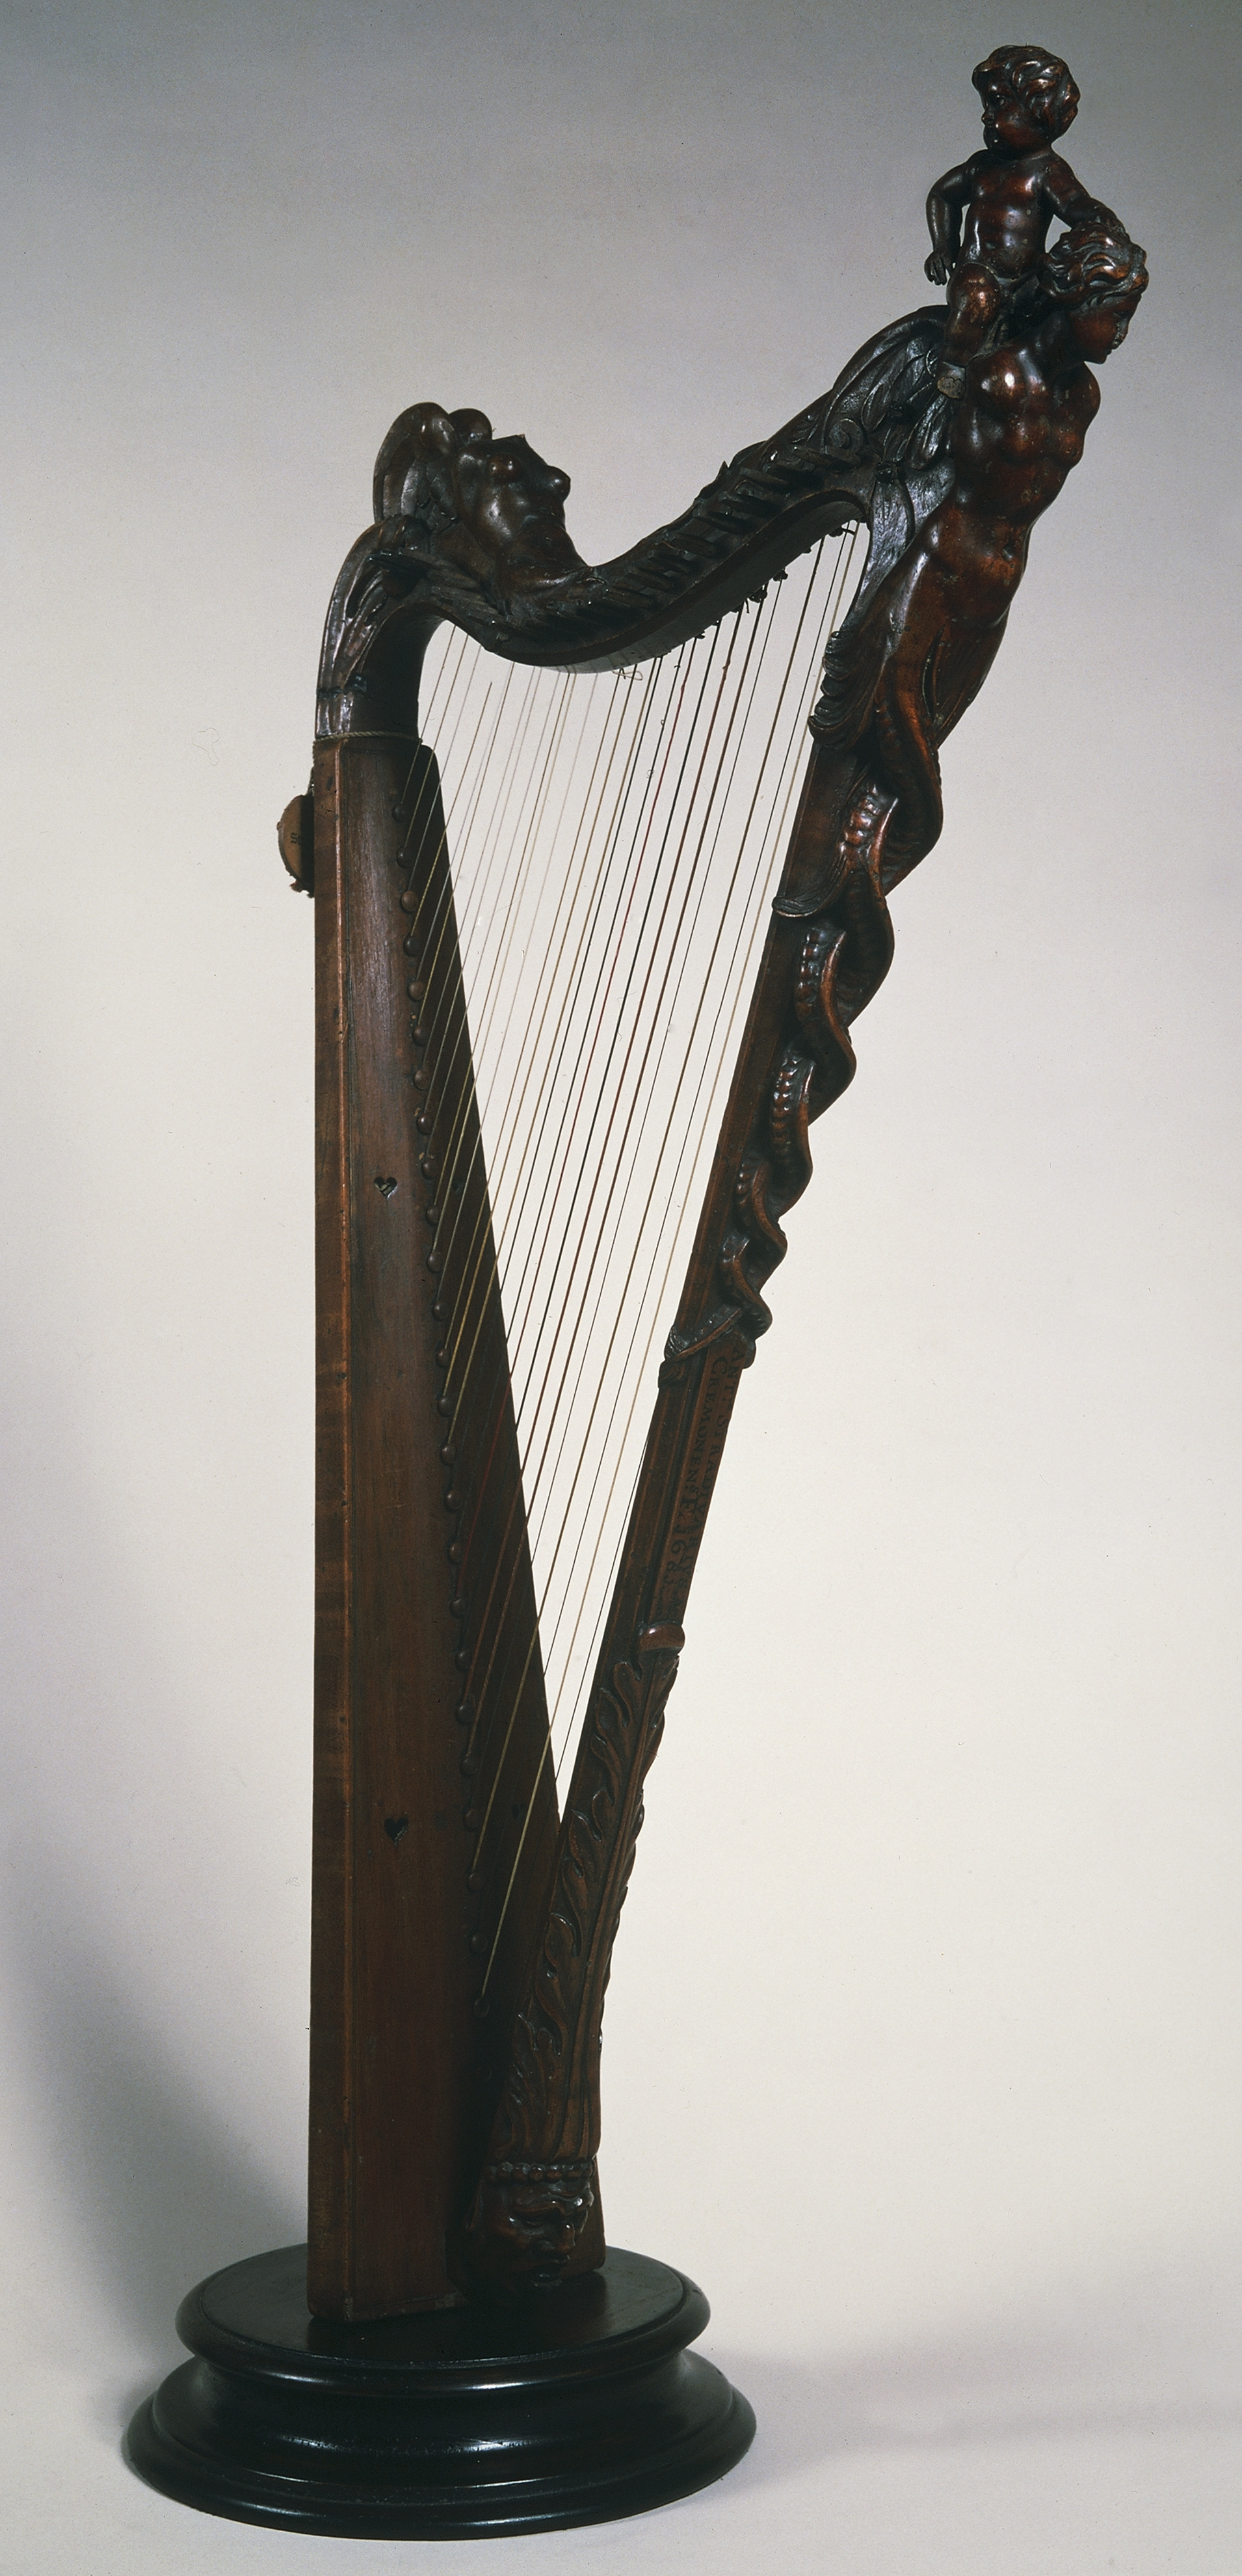 Small harp by Stradivari in 1681. Photo: Getty Images